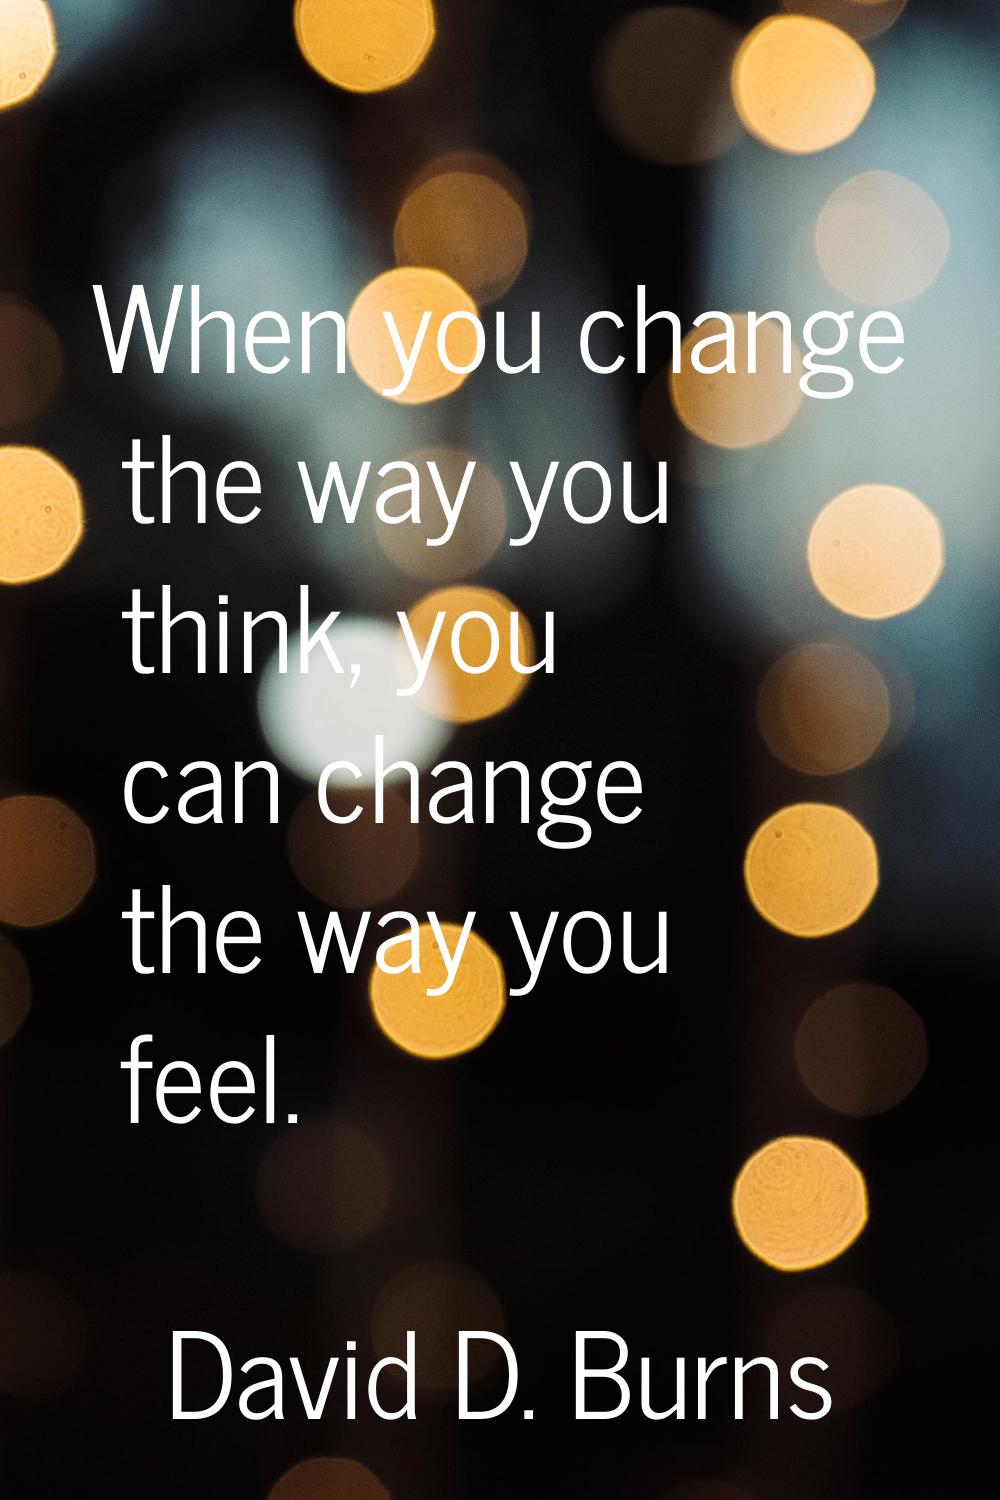 When you change the way you think, you can change the way you feel.